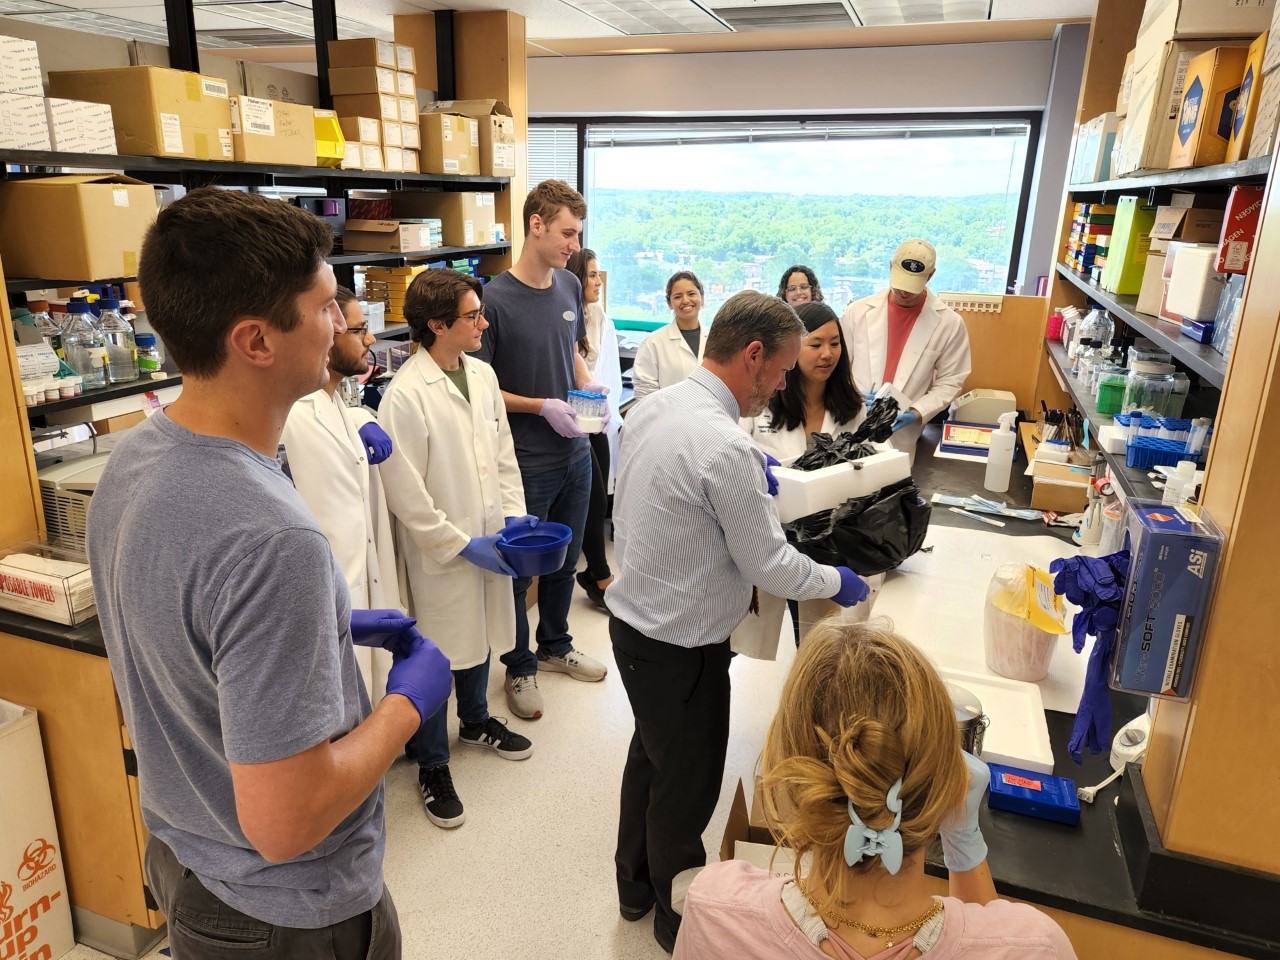 Dr. Frankel and team working in the lab